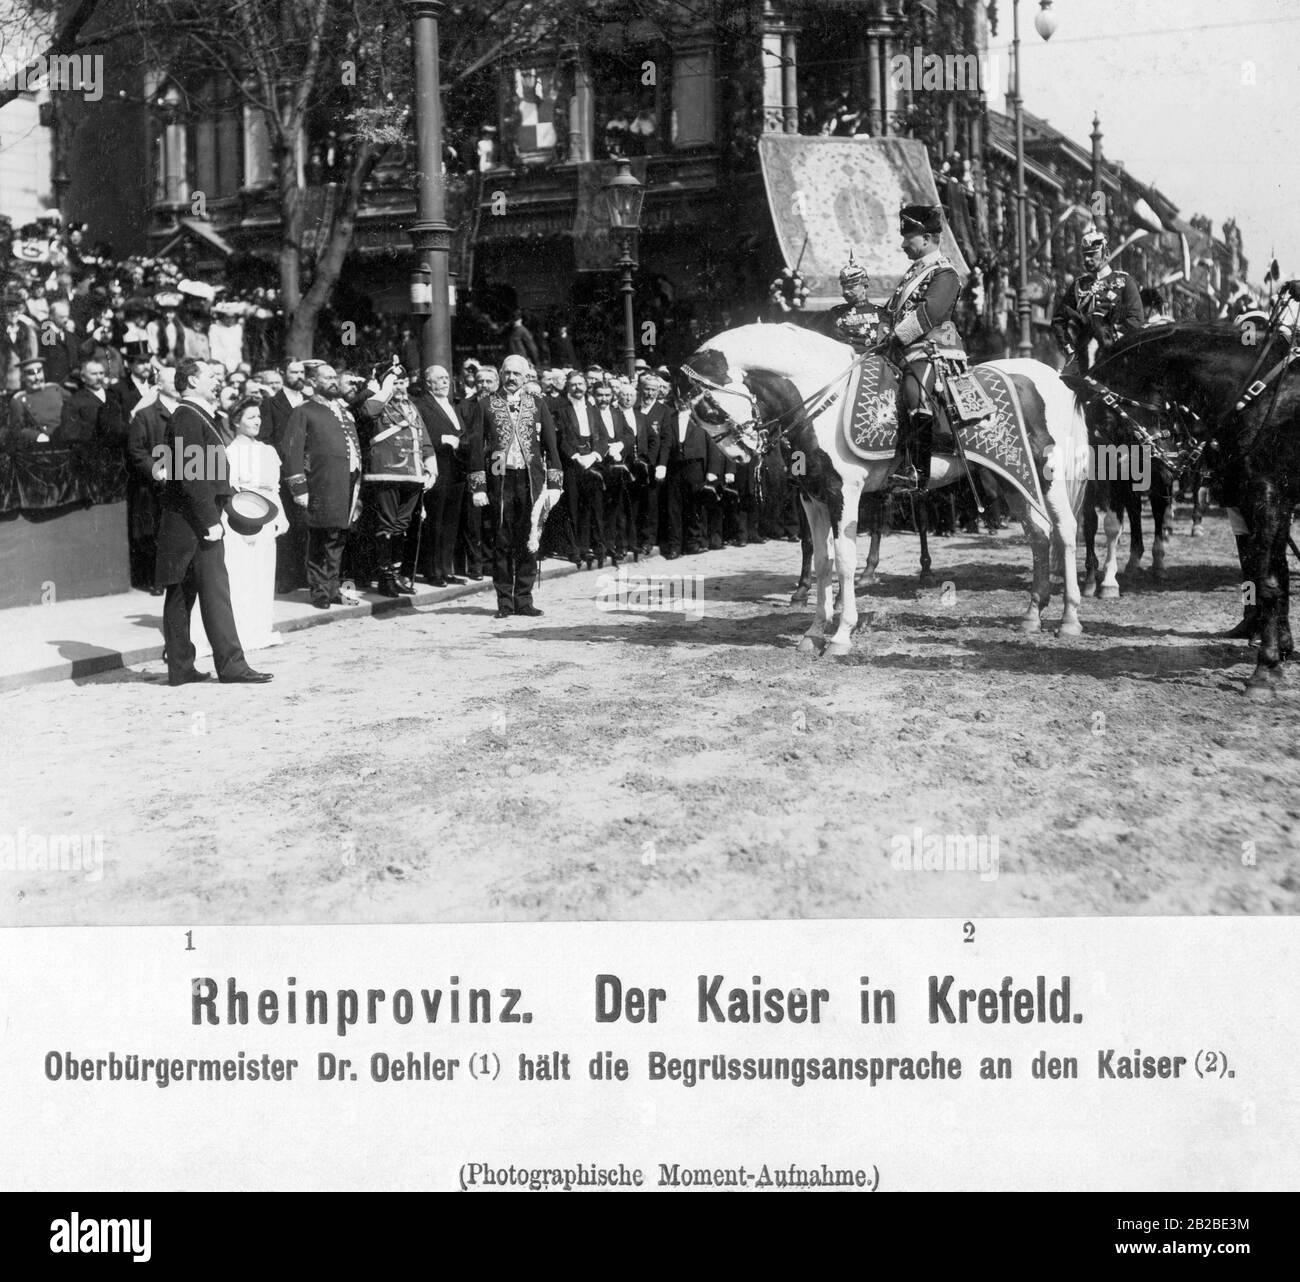 The Mayor of Krefeld, Adalbert Oehler, gives a welcome address to Kaiser Wilhelm II. Next to the Lord Mayor is his daughter Ilse Oehler.Wilhelm sits on a horse in the uniform of the 1. Leib-Husaren-Regiments Nr. 1. Right and left behind Wilhelm are two generals of the German Army, on the left the General Moritz von Bissing with (among others) the following orders: Black Eagle Order, Red Eagle Order, Iron Cross II Class (1870). The picture was taken at the corner of Rheinstrasse and Ostwall. Stock Photo